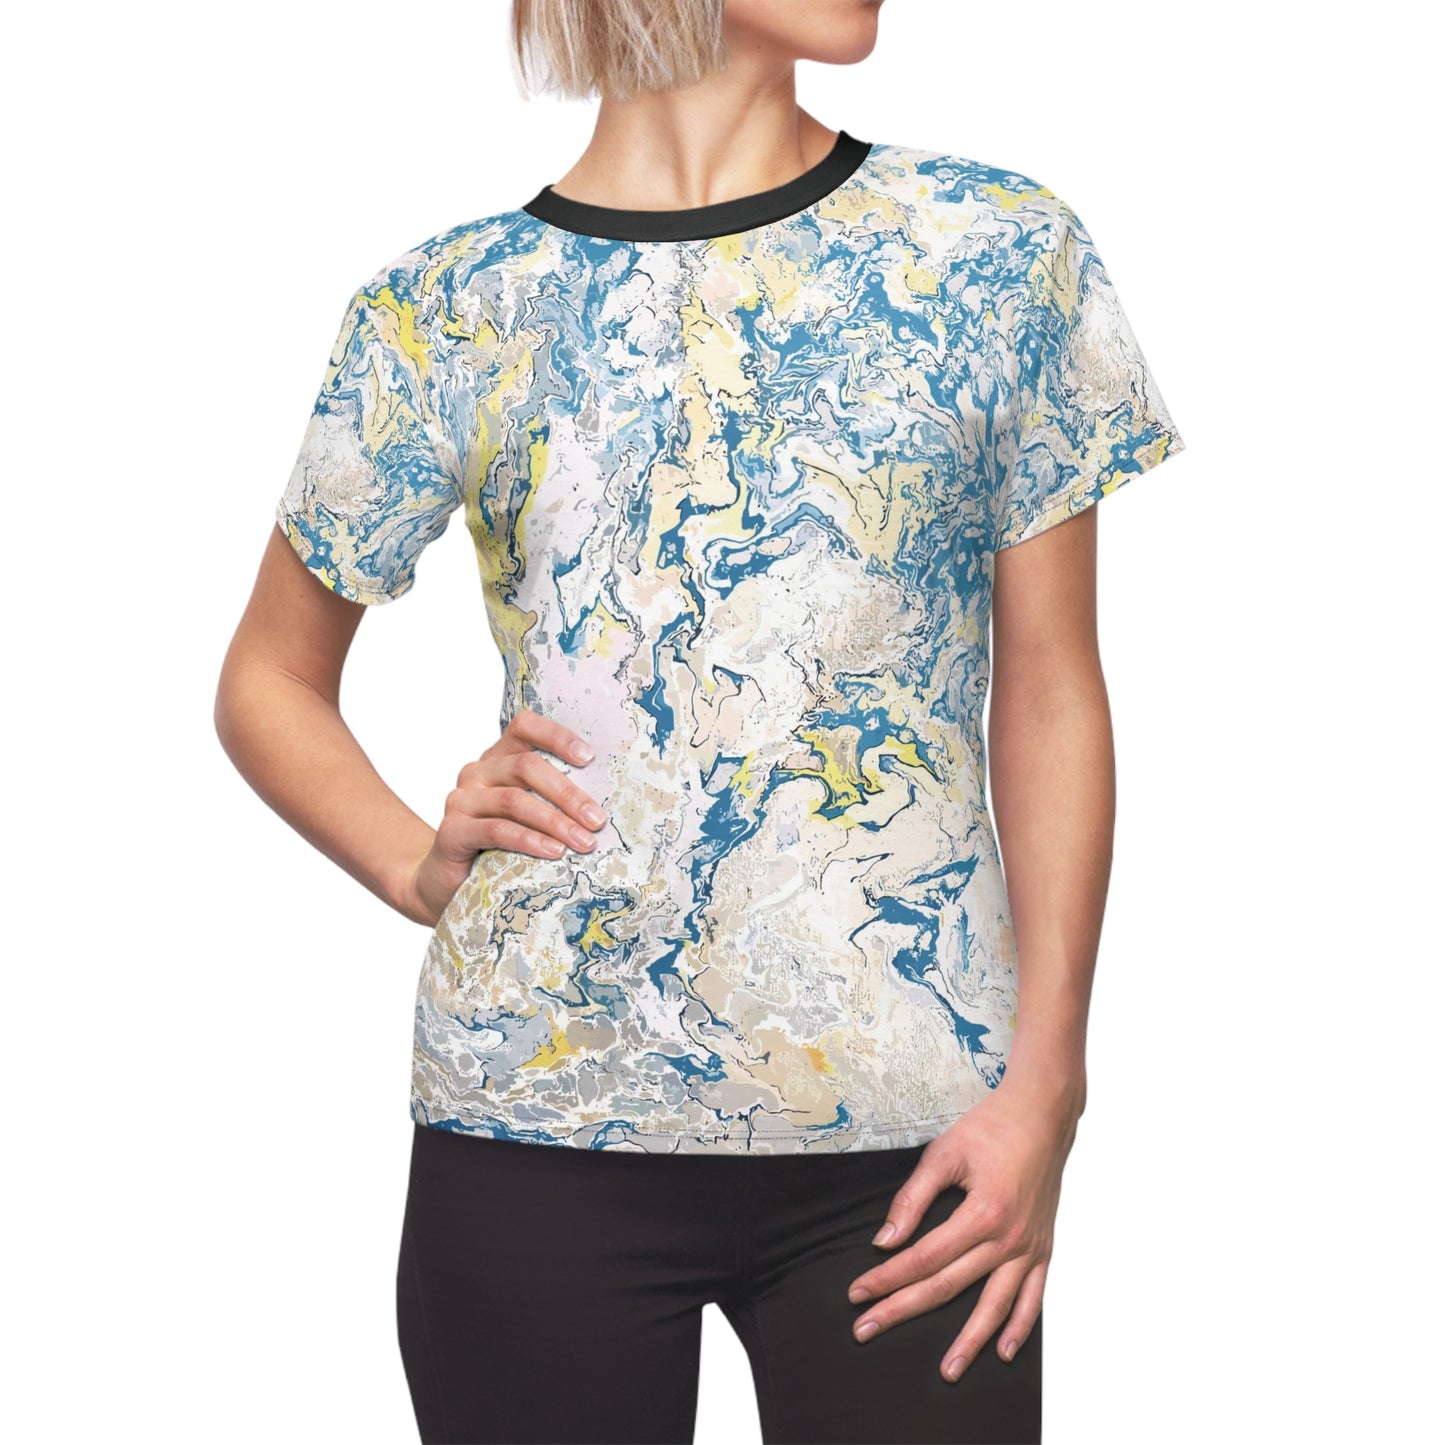 Weight of Choice: Women's All-Over Print Cut & Sew Tee